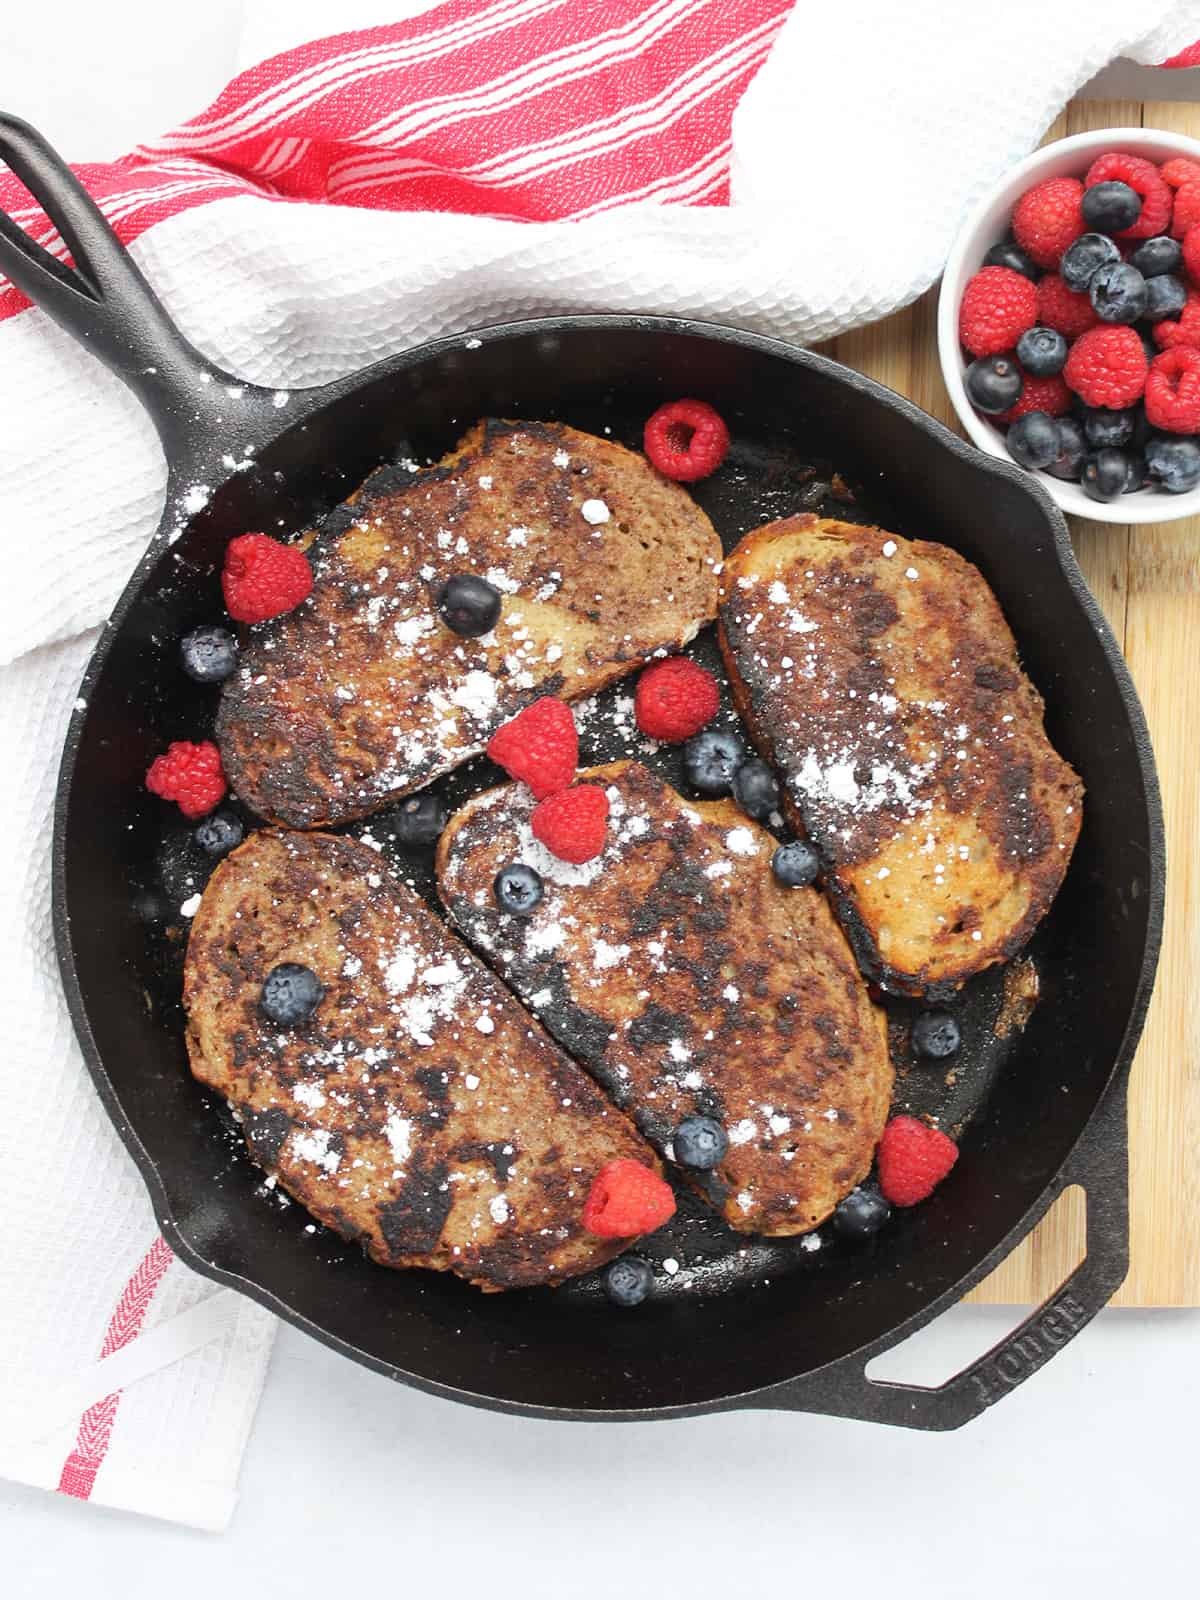 Four slices of pumpkin spice French toast in a cast iron skillet with powdered sugar and fresh berries.